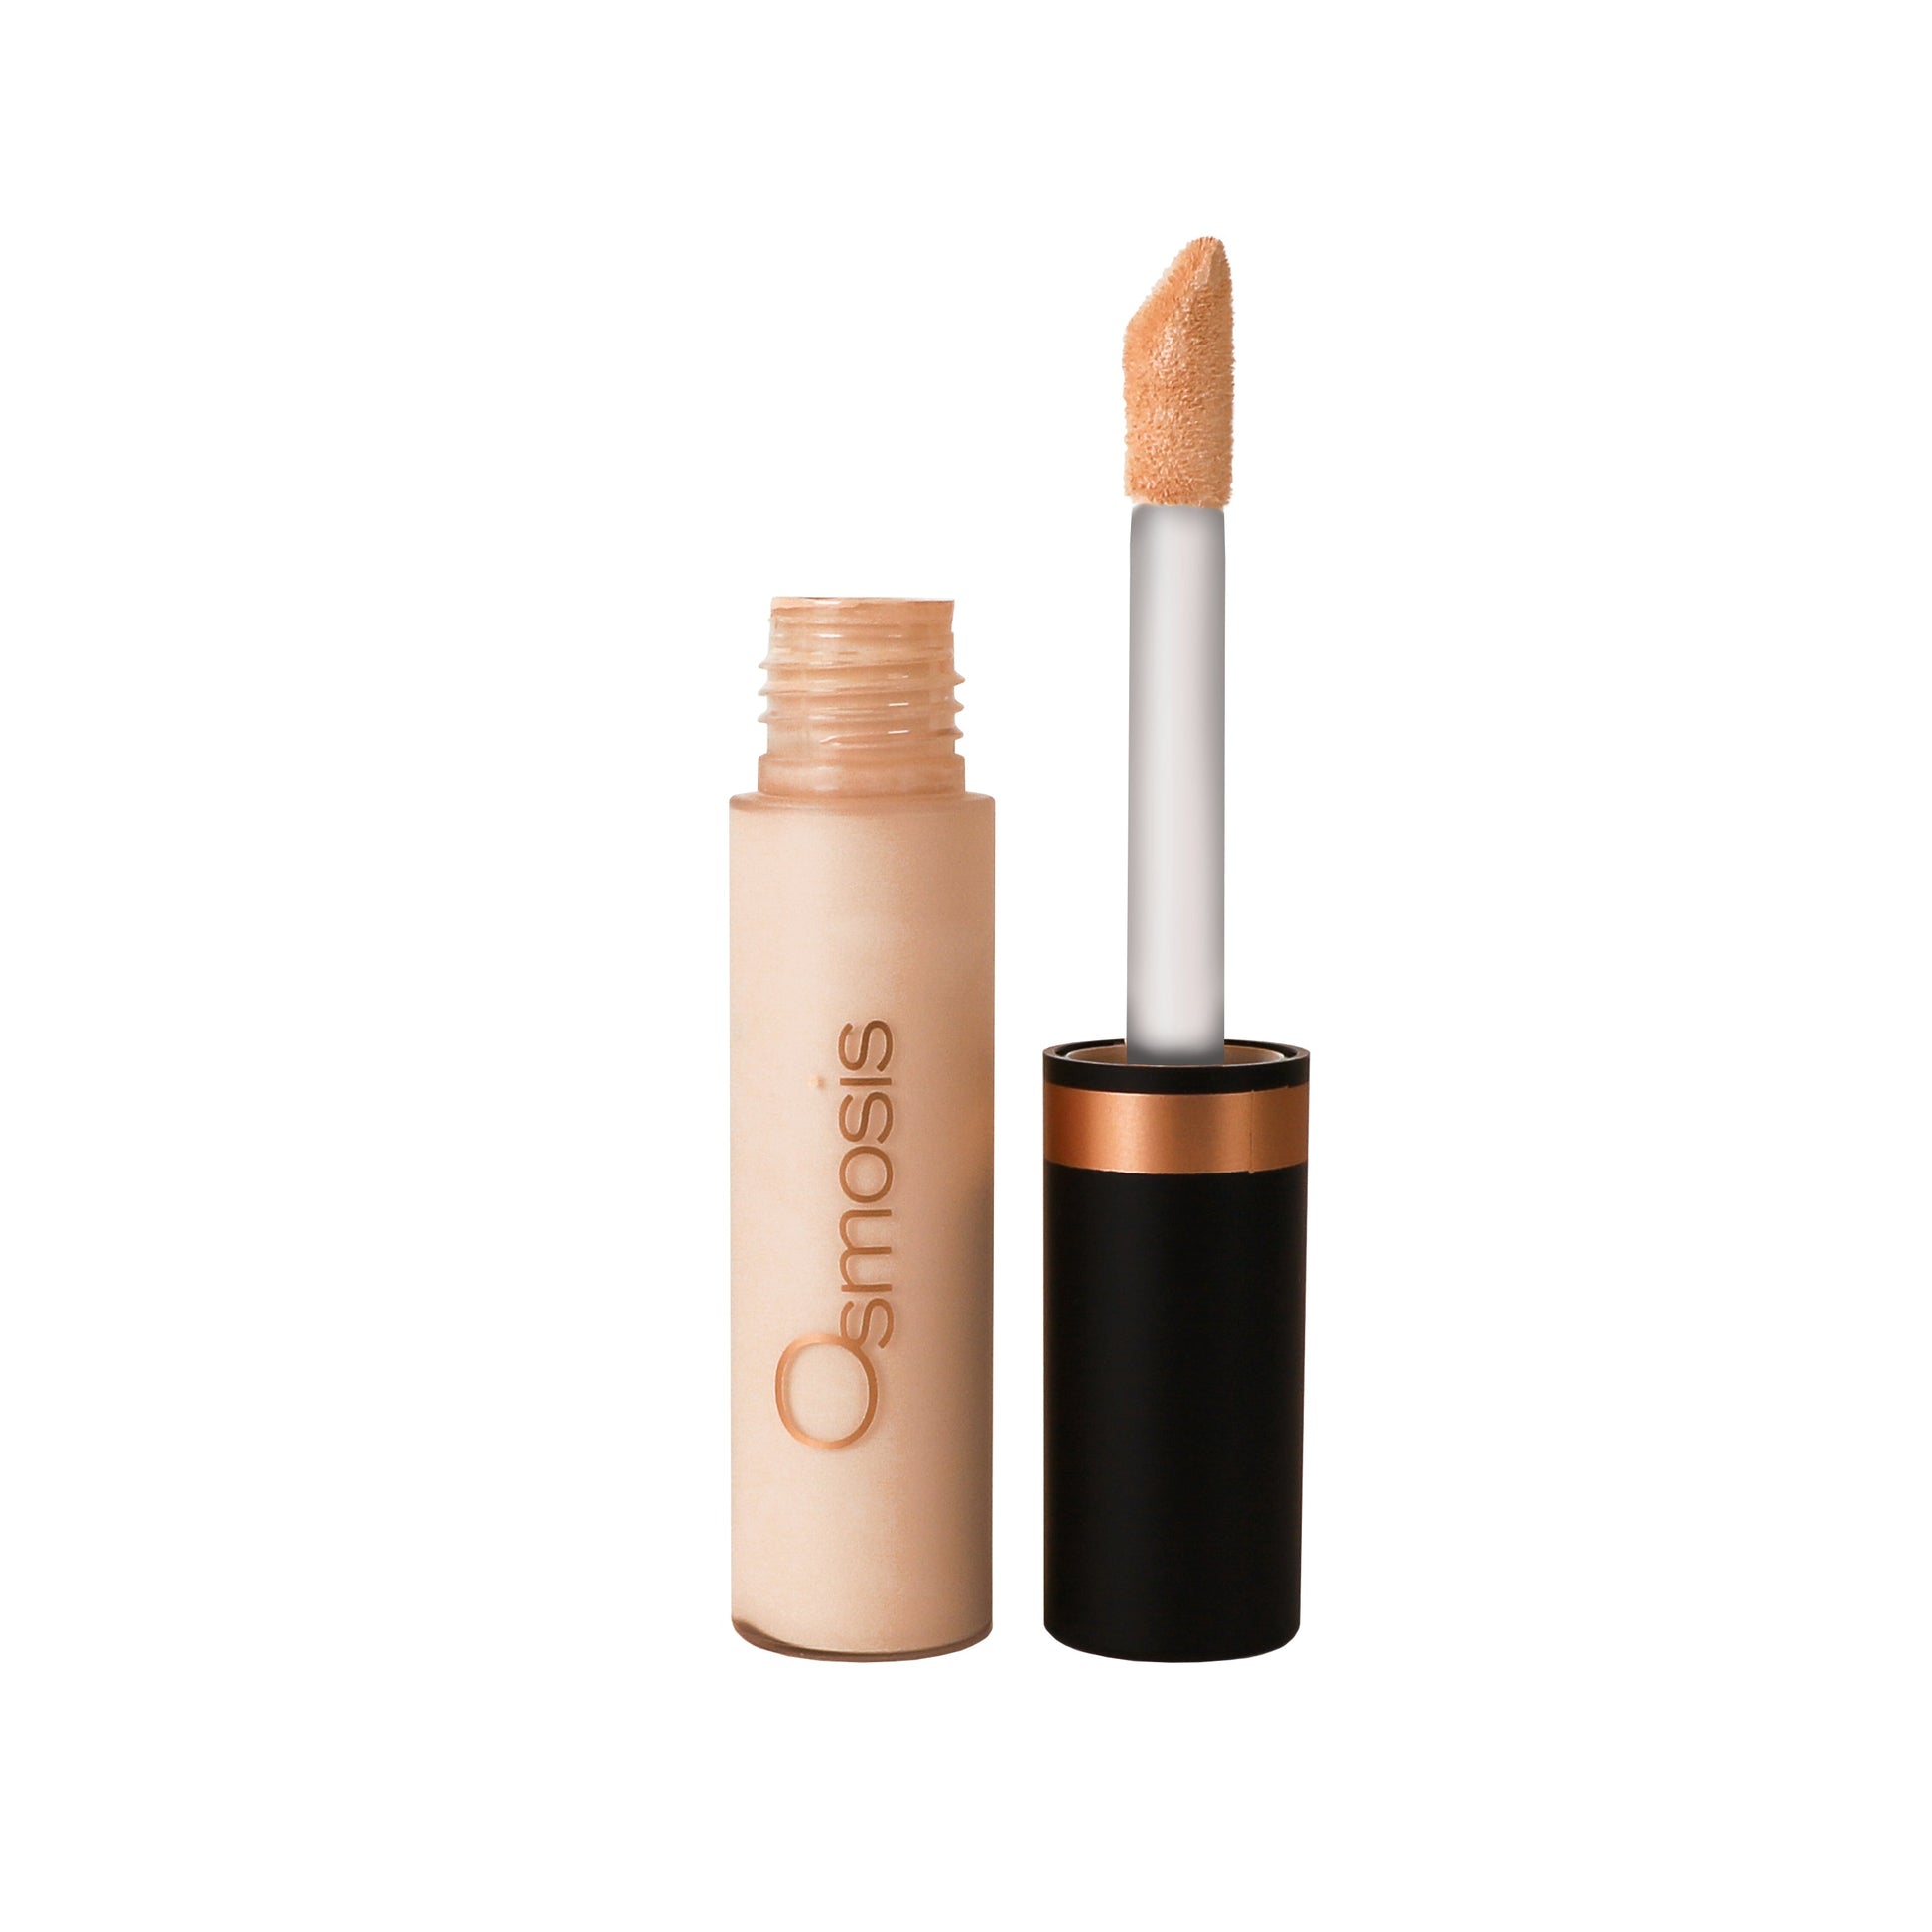 Flawless concealer Osmosis Beauty Porcelain open